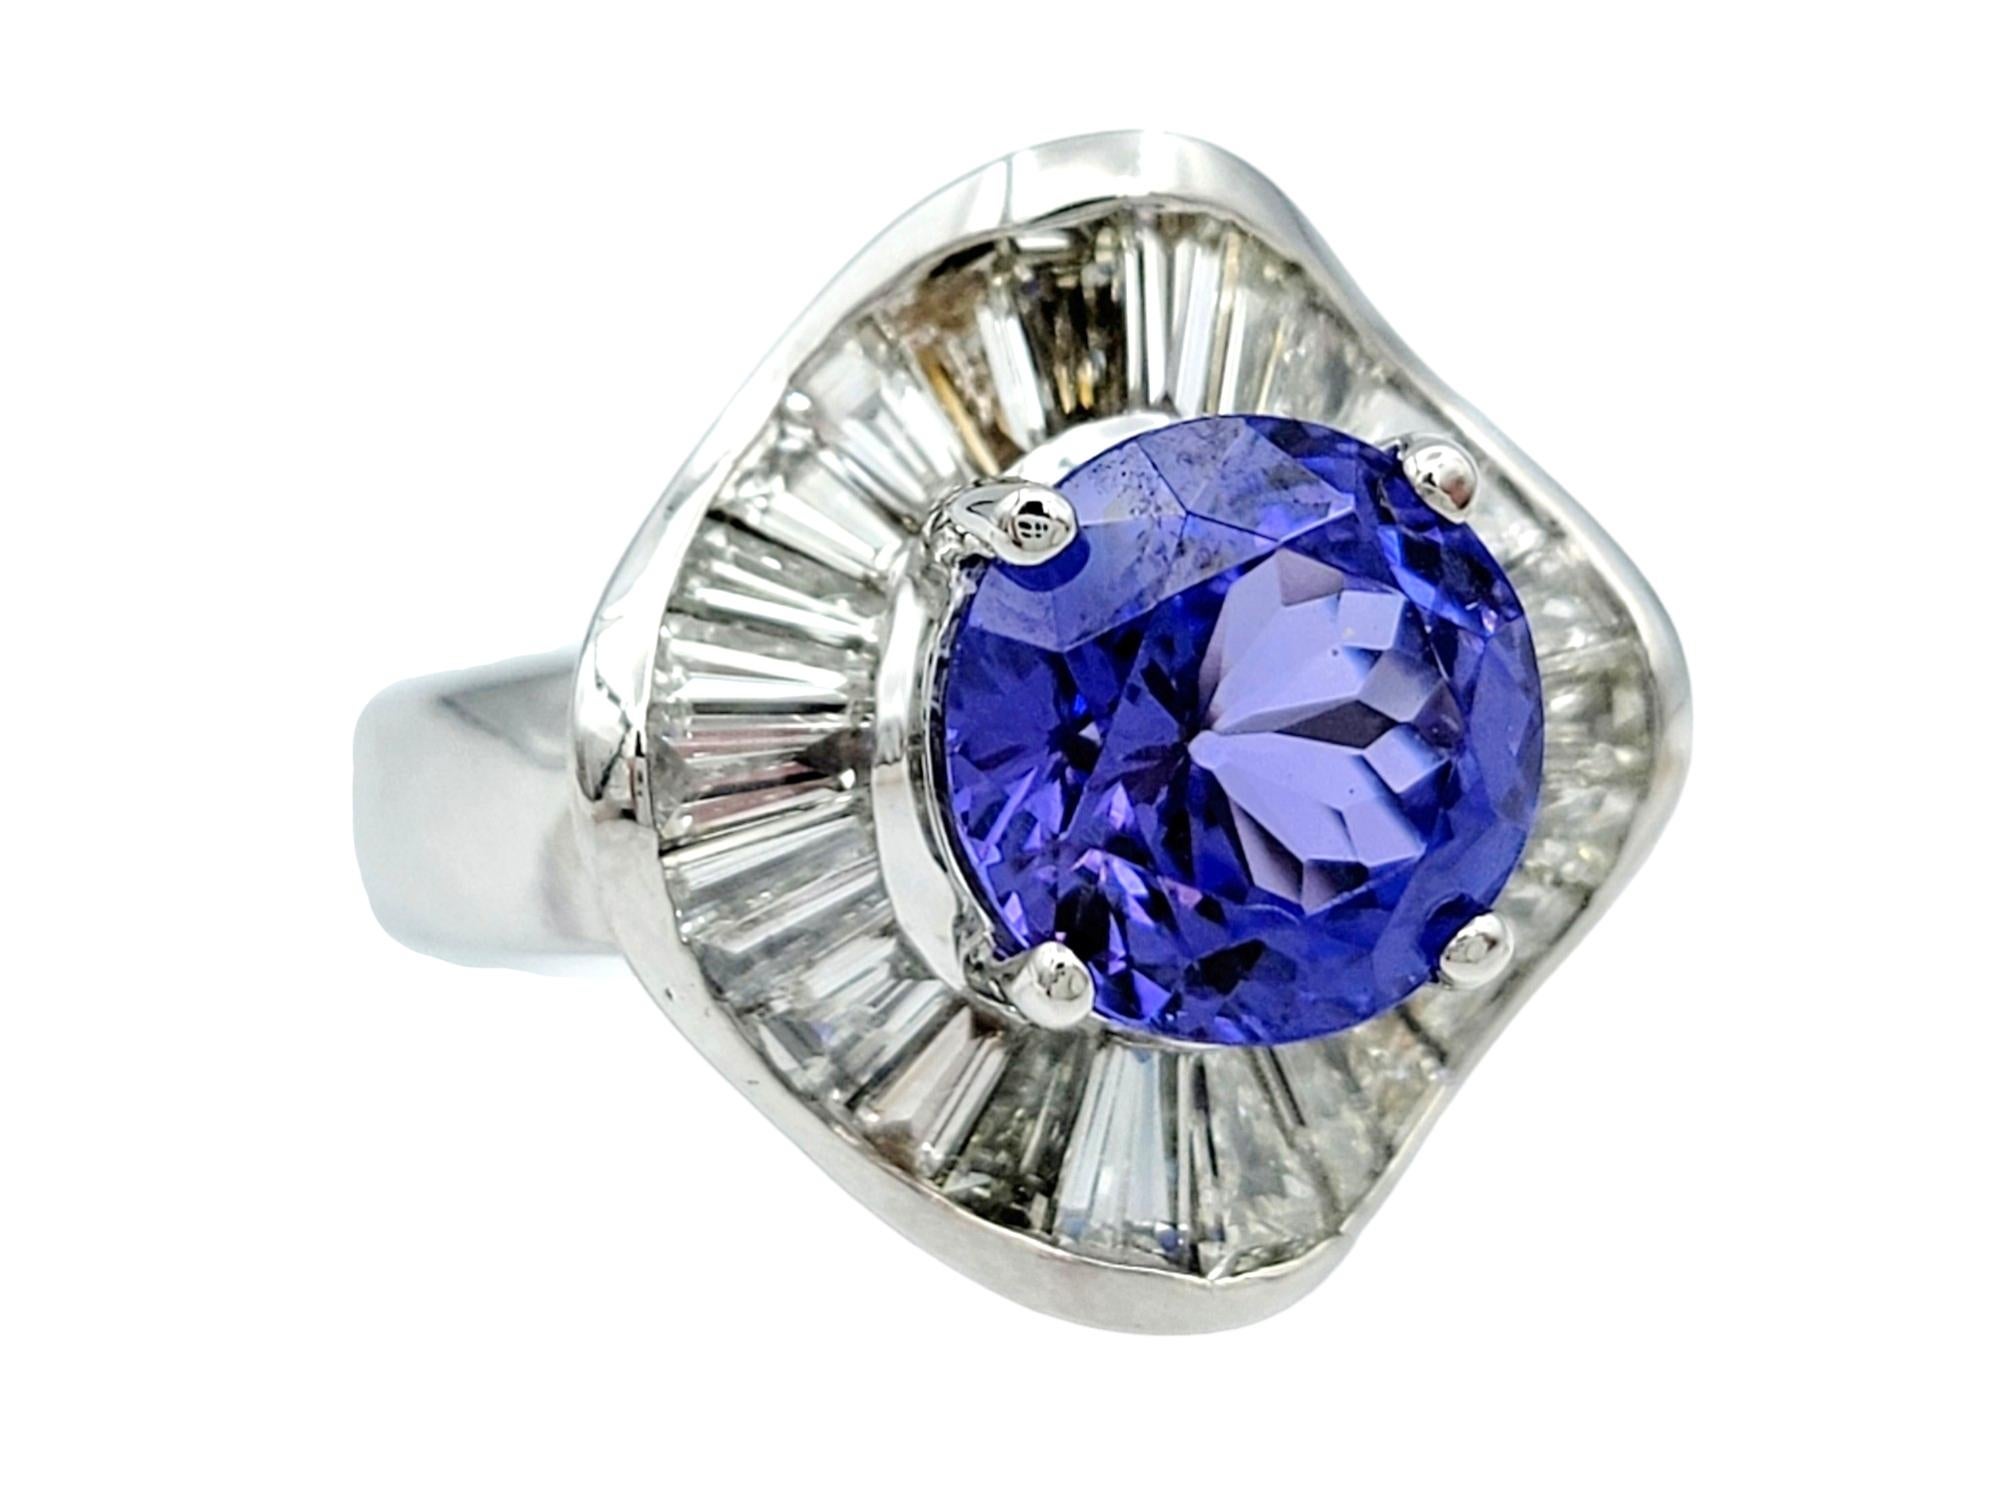 Ring Size: 7.5

Behold the beauty of our tanzanite and diamond ring, a captivating piece that seamlessly marries classic elegance with modern design. Set in a polished 18k white gold setting, this ring boasts a prong-set tanzanite that sits